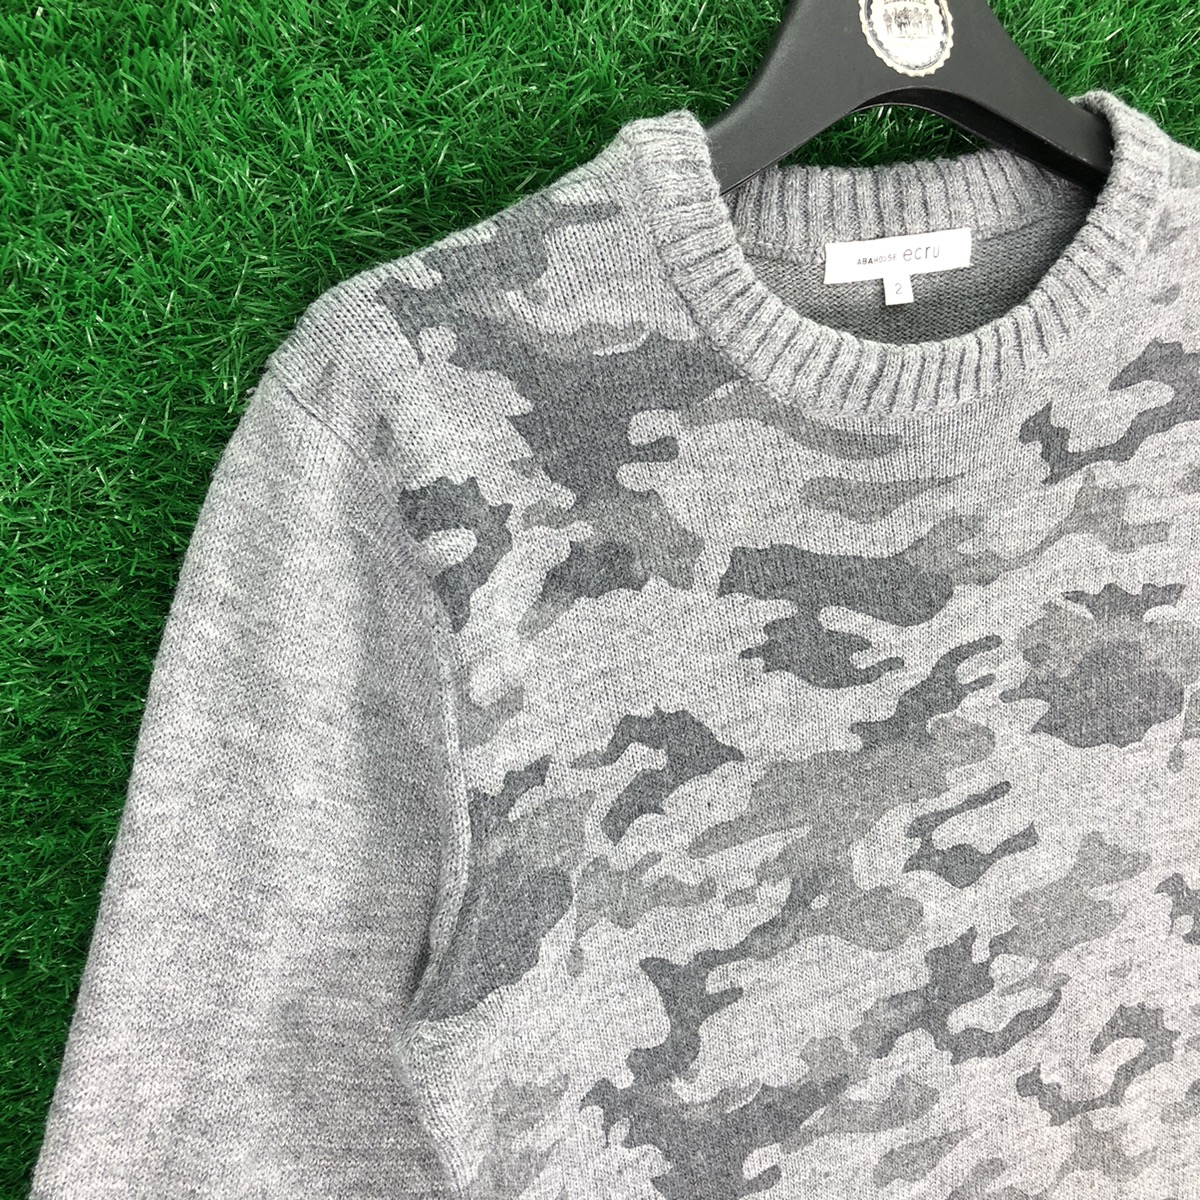 Japanese Brand - Abahouse Camo Knit Sweater - 2